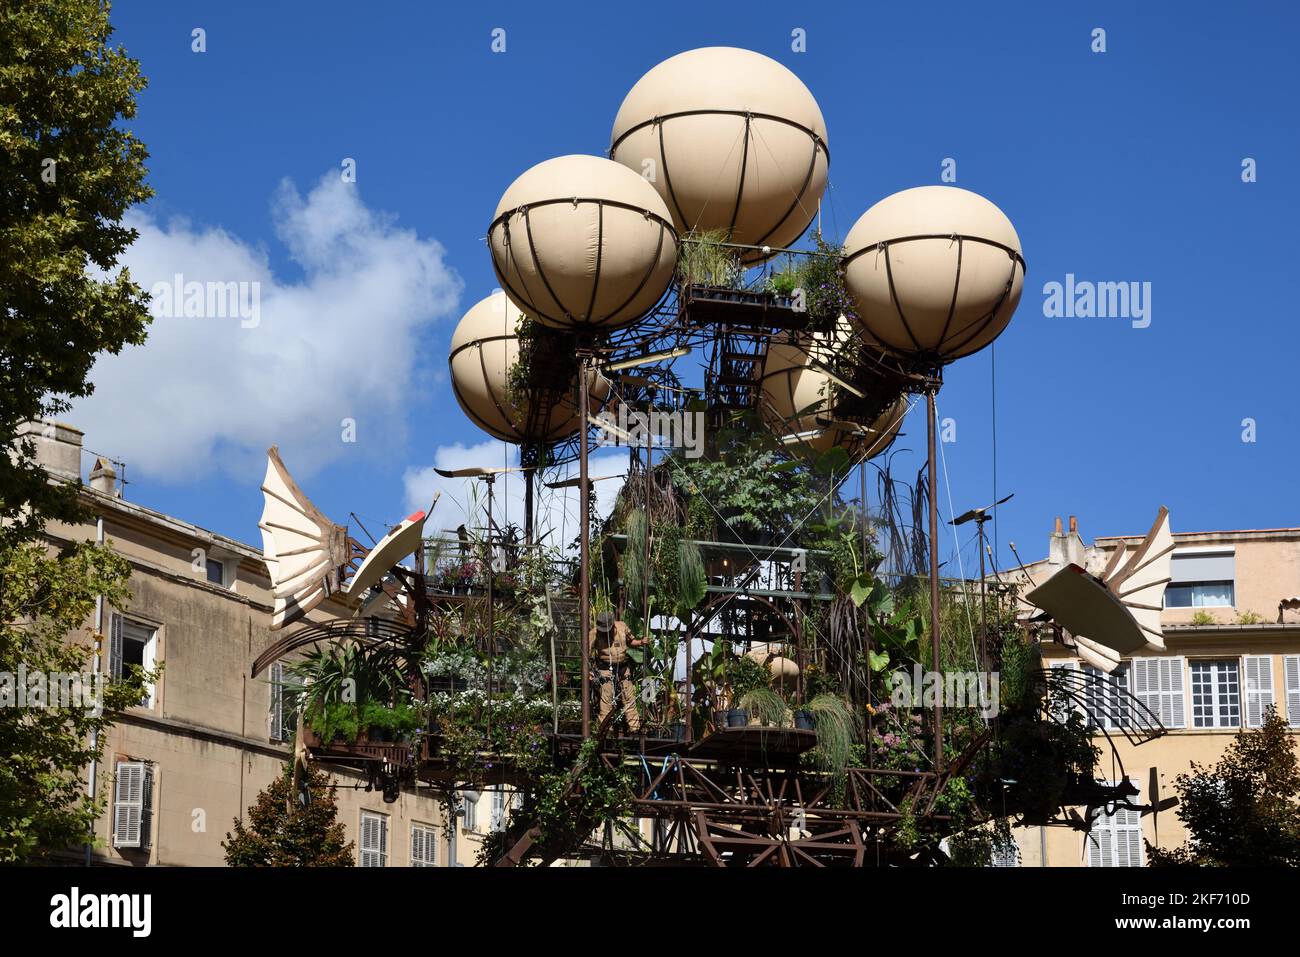 Futuristic Flying Machine or Contraption 'Aéroflorale' Built by Street Theatre Group 'La Machine' to Collect Plant Specimens from Around the World Stock Photo